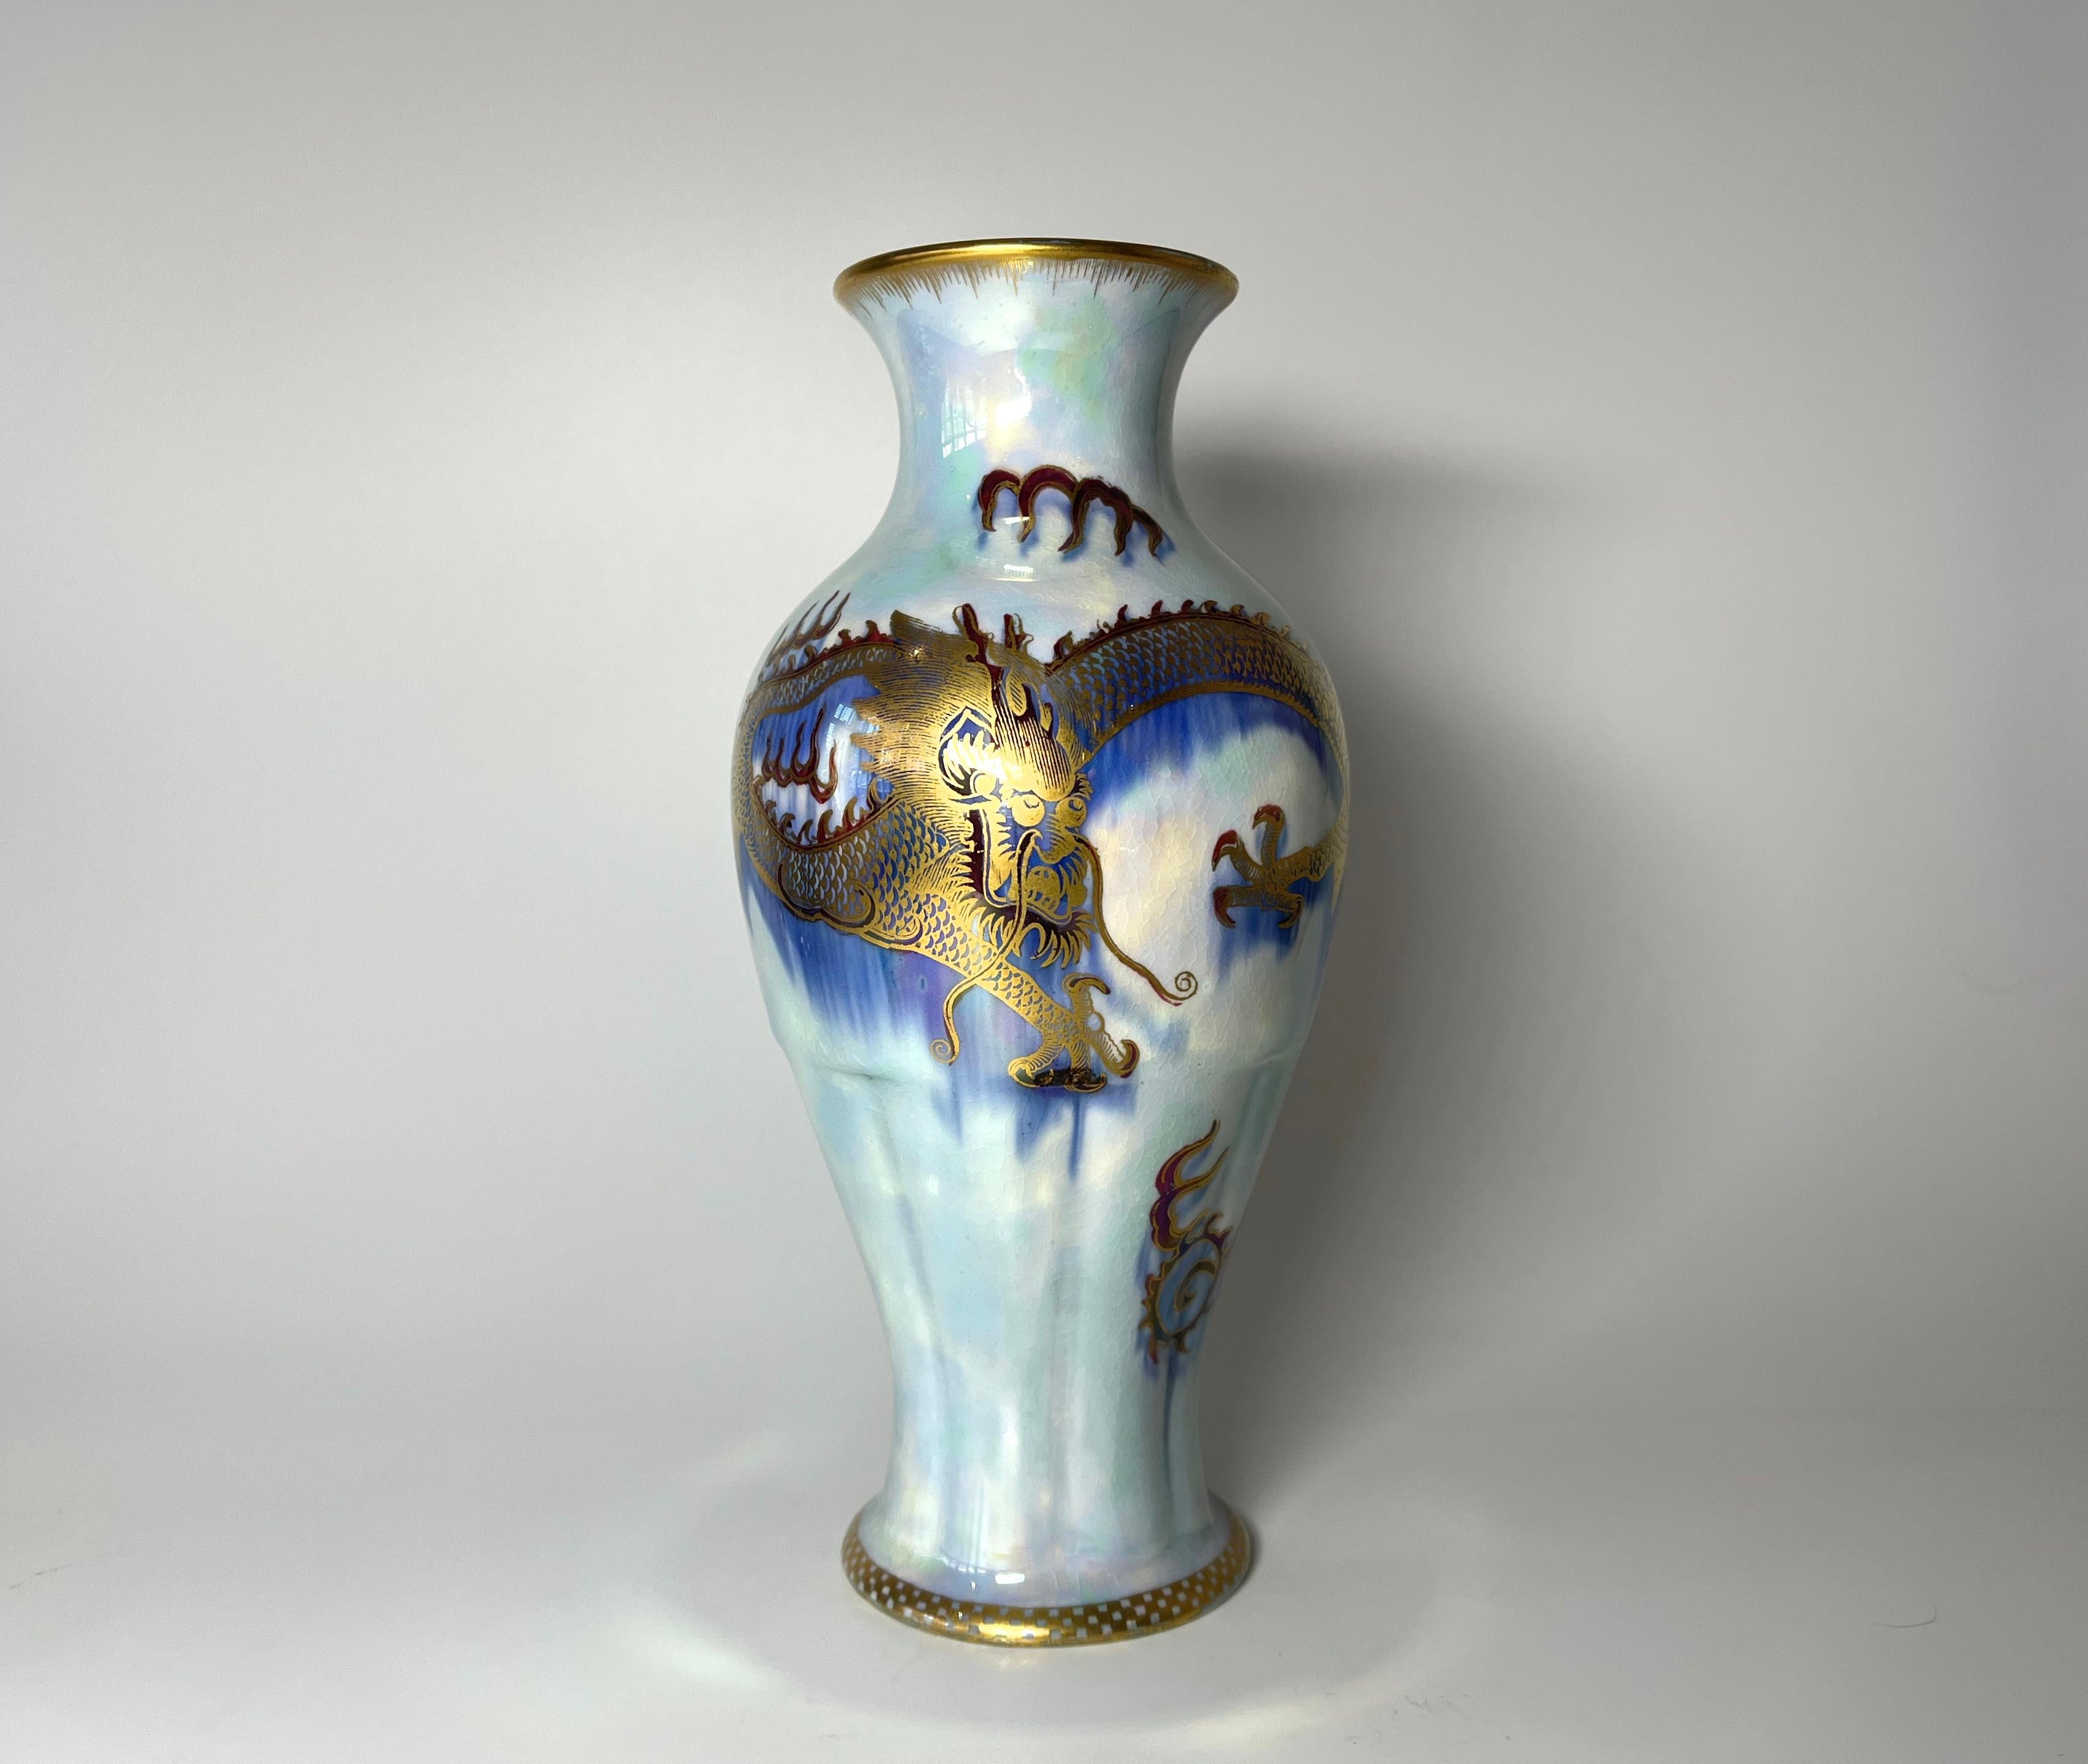 A dramatic blue pearl lustre dragon porcelain vase created in the 1920s by Daisy Makeig-Jones for Wedgwood,
Dominated by a bold gilded dragon on an azure blue background. Exotic gilded script motifs decorate among the pale blue lustre mottling.